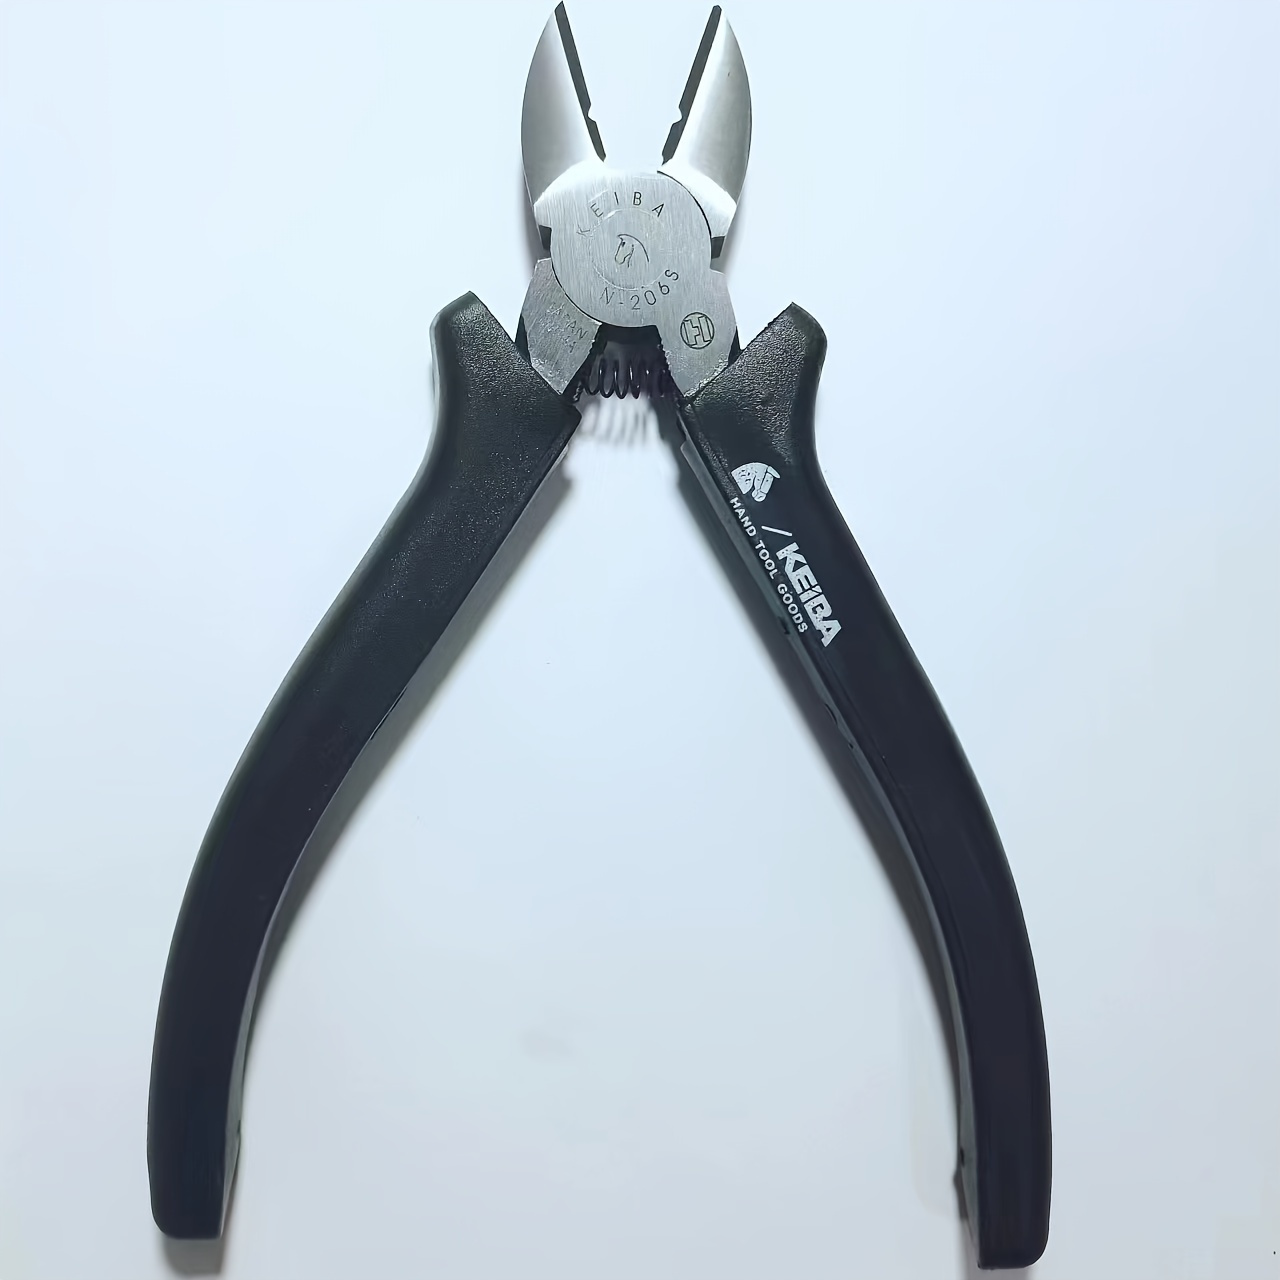 KEIBA 3 Inches Mini Pliers Set with Case Includes Diagonal Pliers